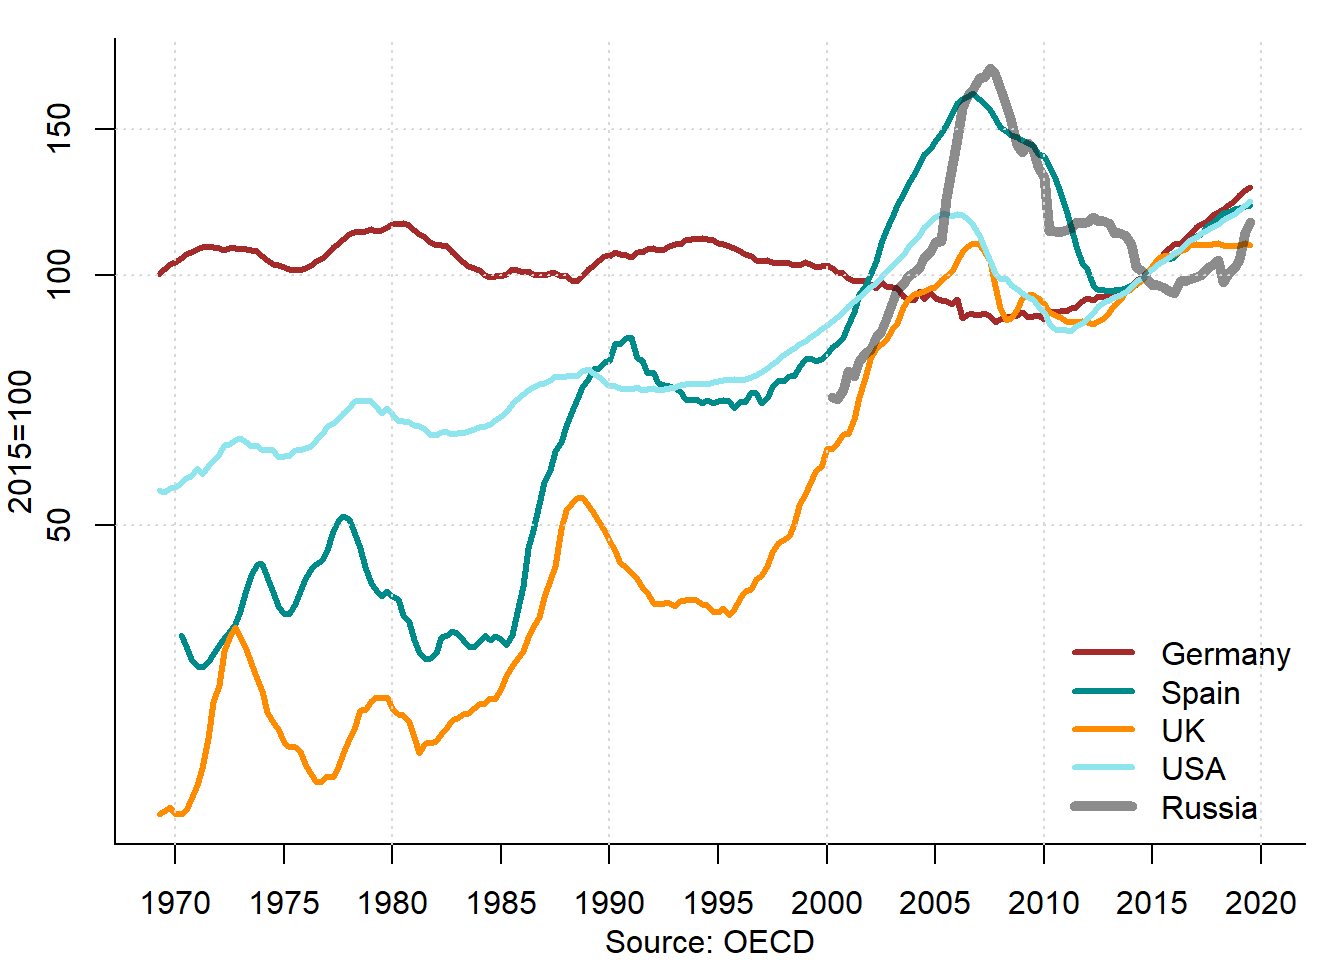 Real housing prices in selected countries, 1970--2020